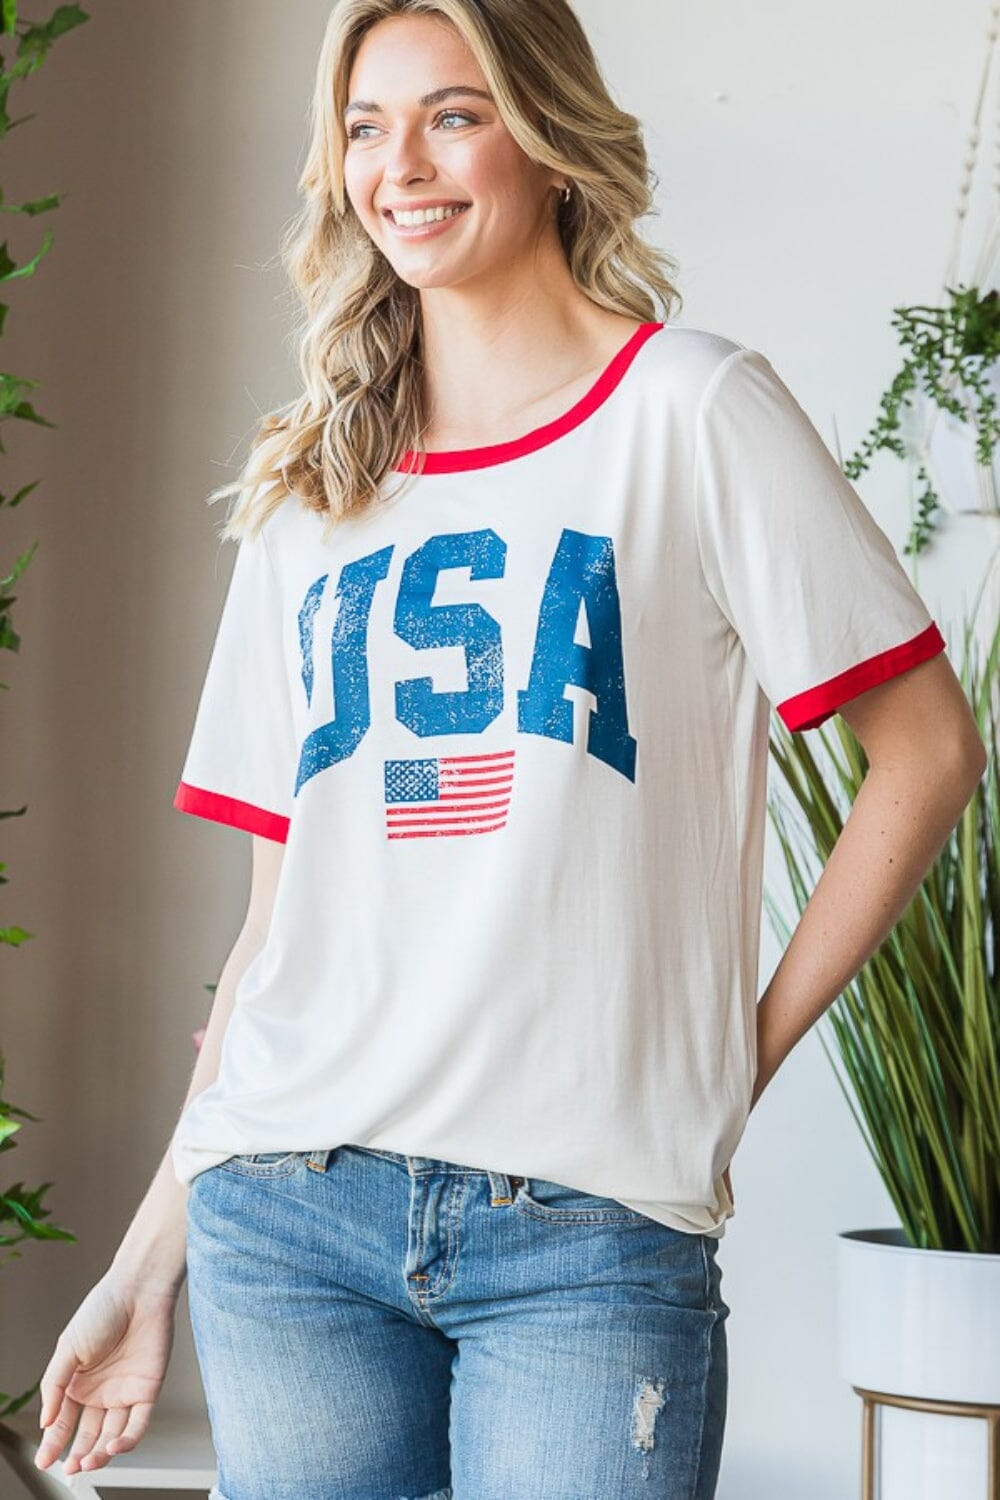 RYRJJ On Clearance 4th of July Shirts for Women Summer Independence Day  Short Sleeve V-Neck T-Shirt Patriotic Tie Dye Color Block Tees  Tops(Black,M) 